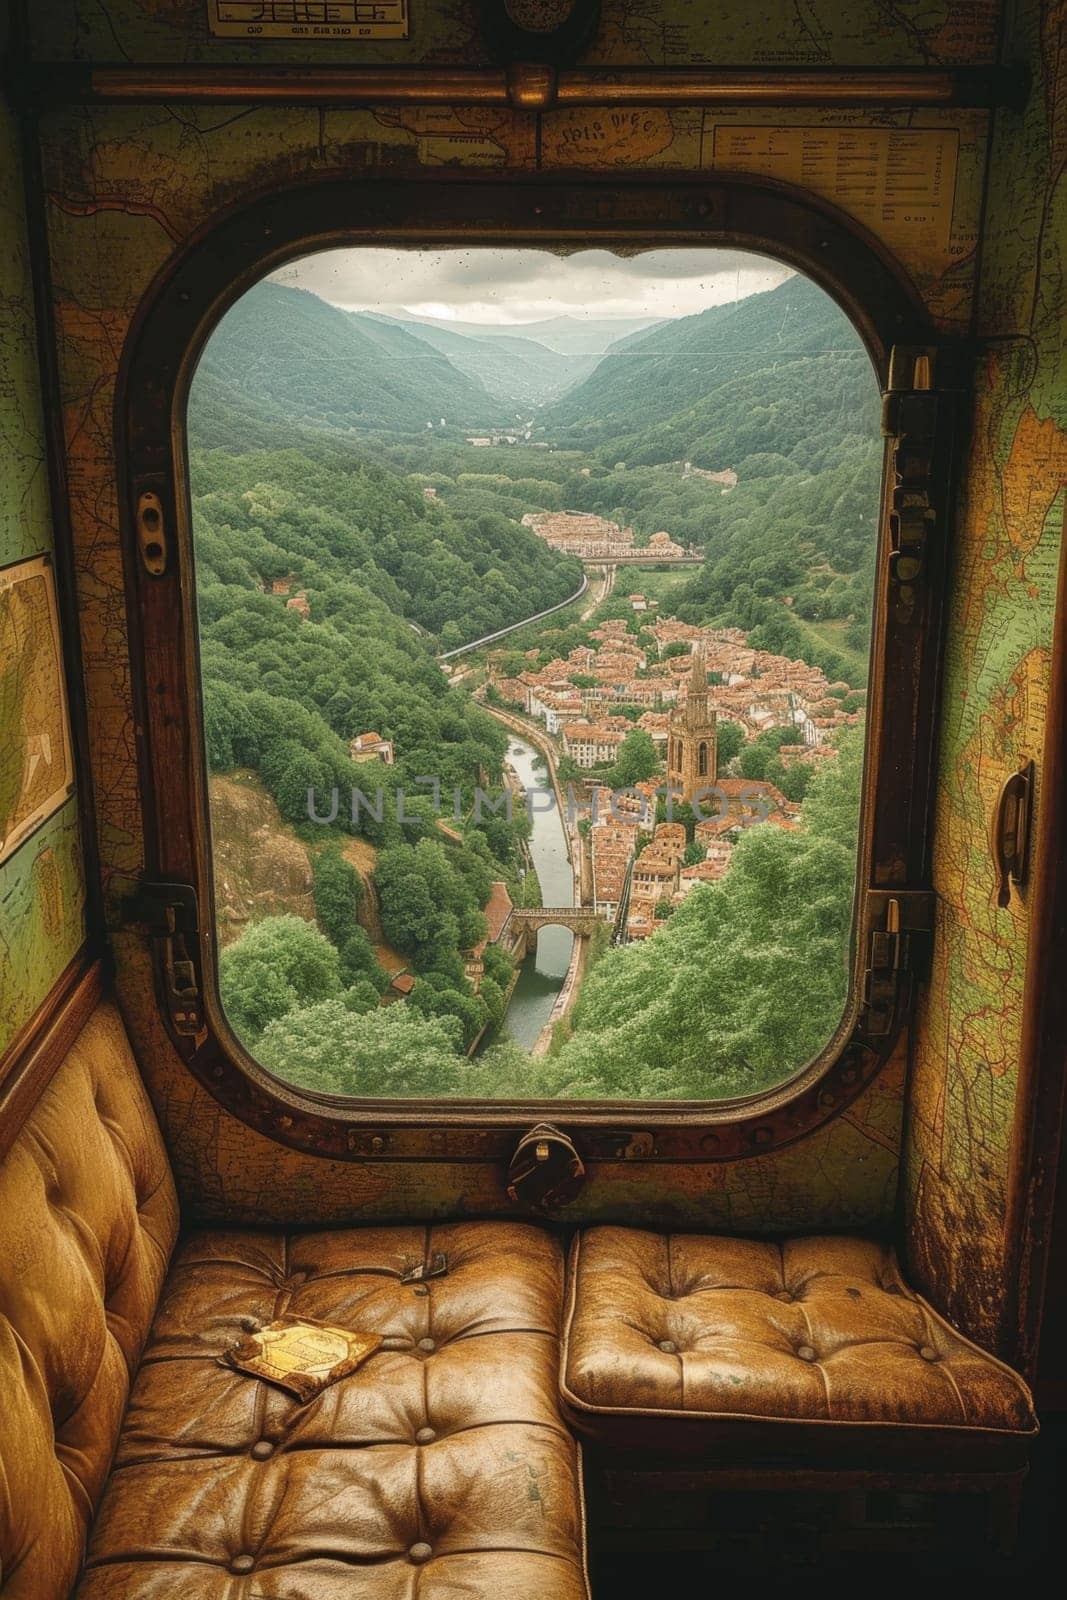 View of the city from the train window. 3d illustration by Lobachad